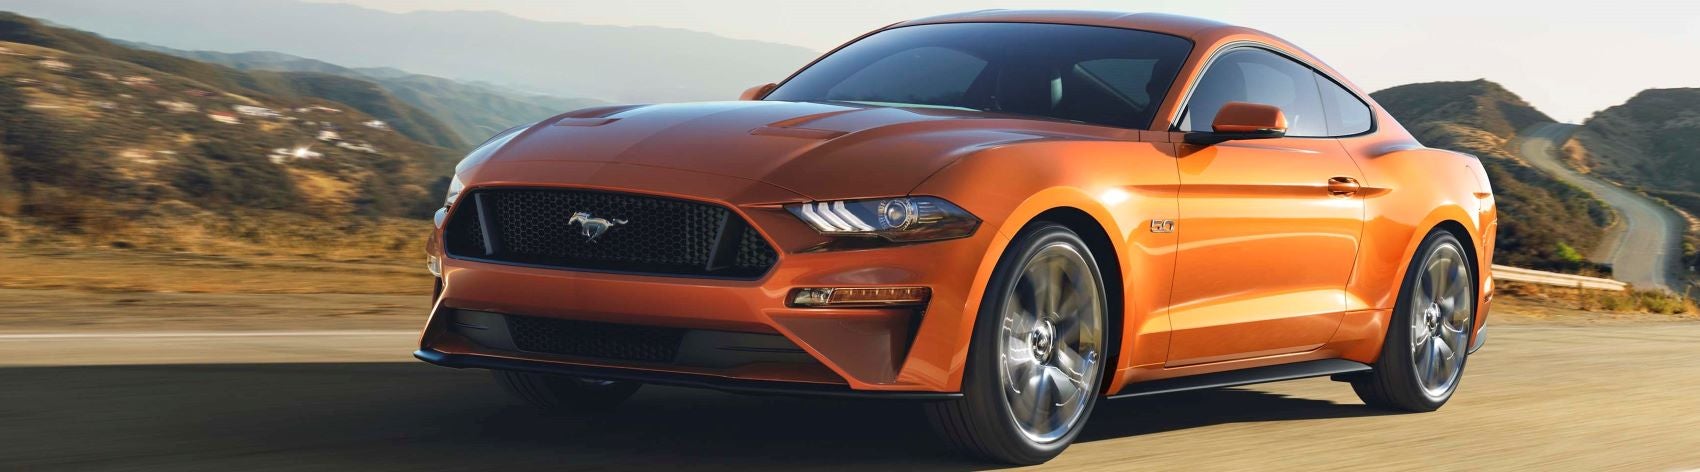 2021 Ford Mustang Plainfield IN